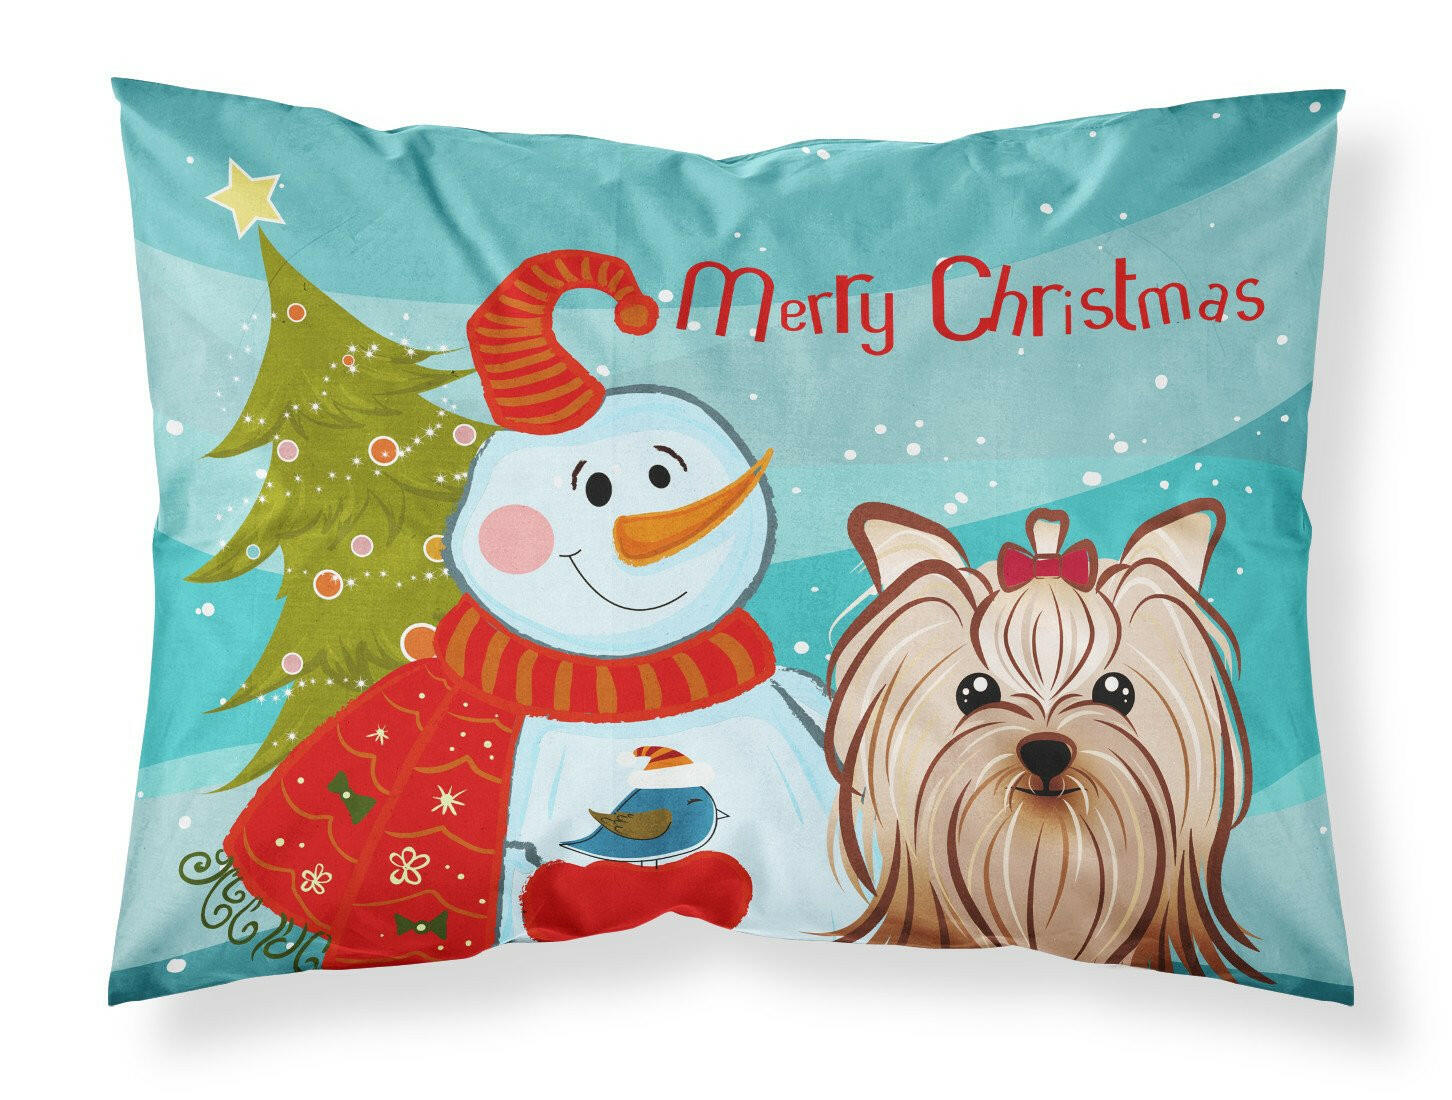 Snowman with Yorkie Yorkshire Terrier Fabric Standard Pillowcase BB1824PILLOWCASE by Caroline's Treasures